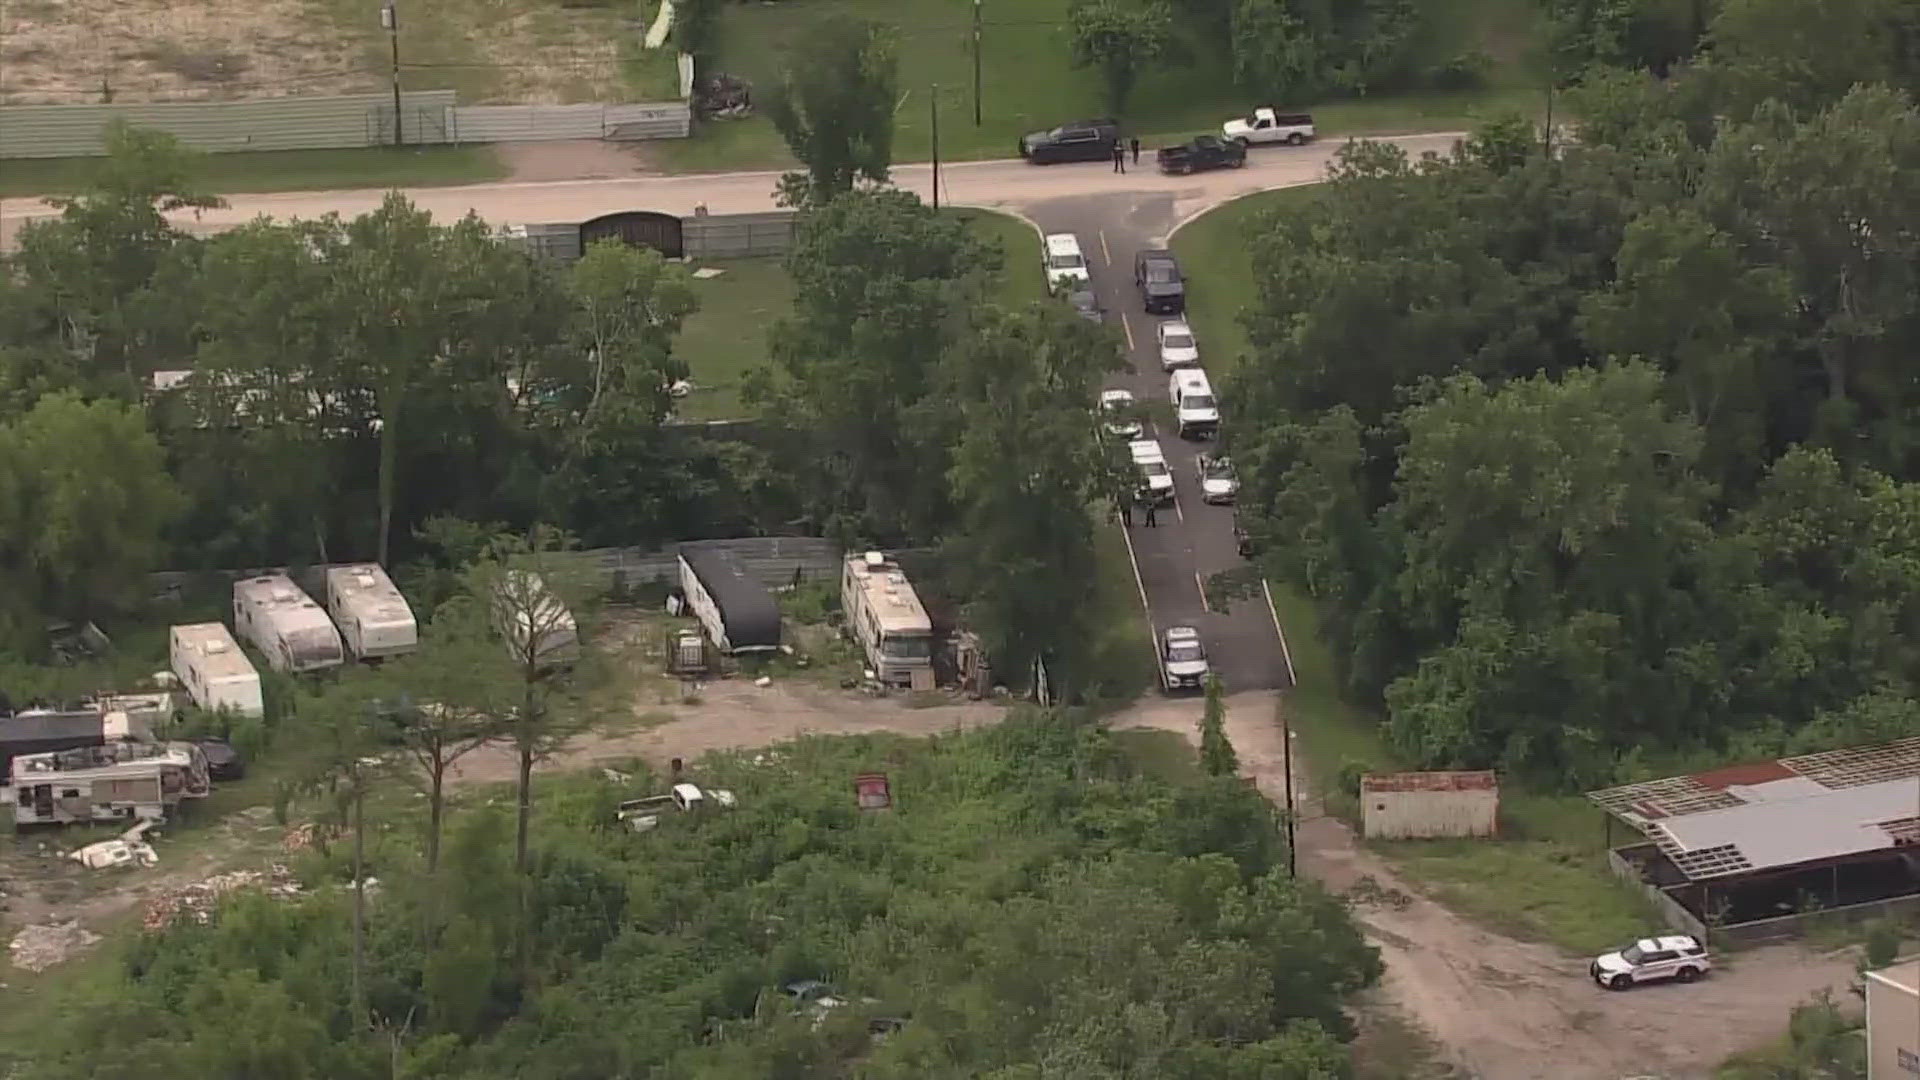 Deputies are investigating the death of a man found at an abandoned construction site in northeast Harris County, according to Sheriff Ed Gonzalez.